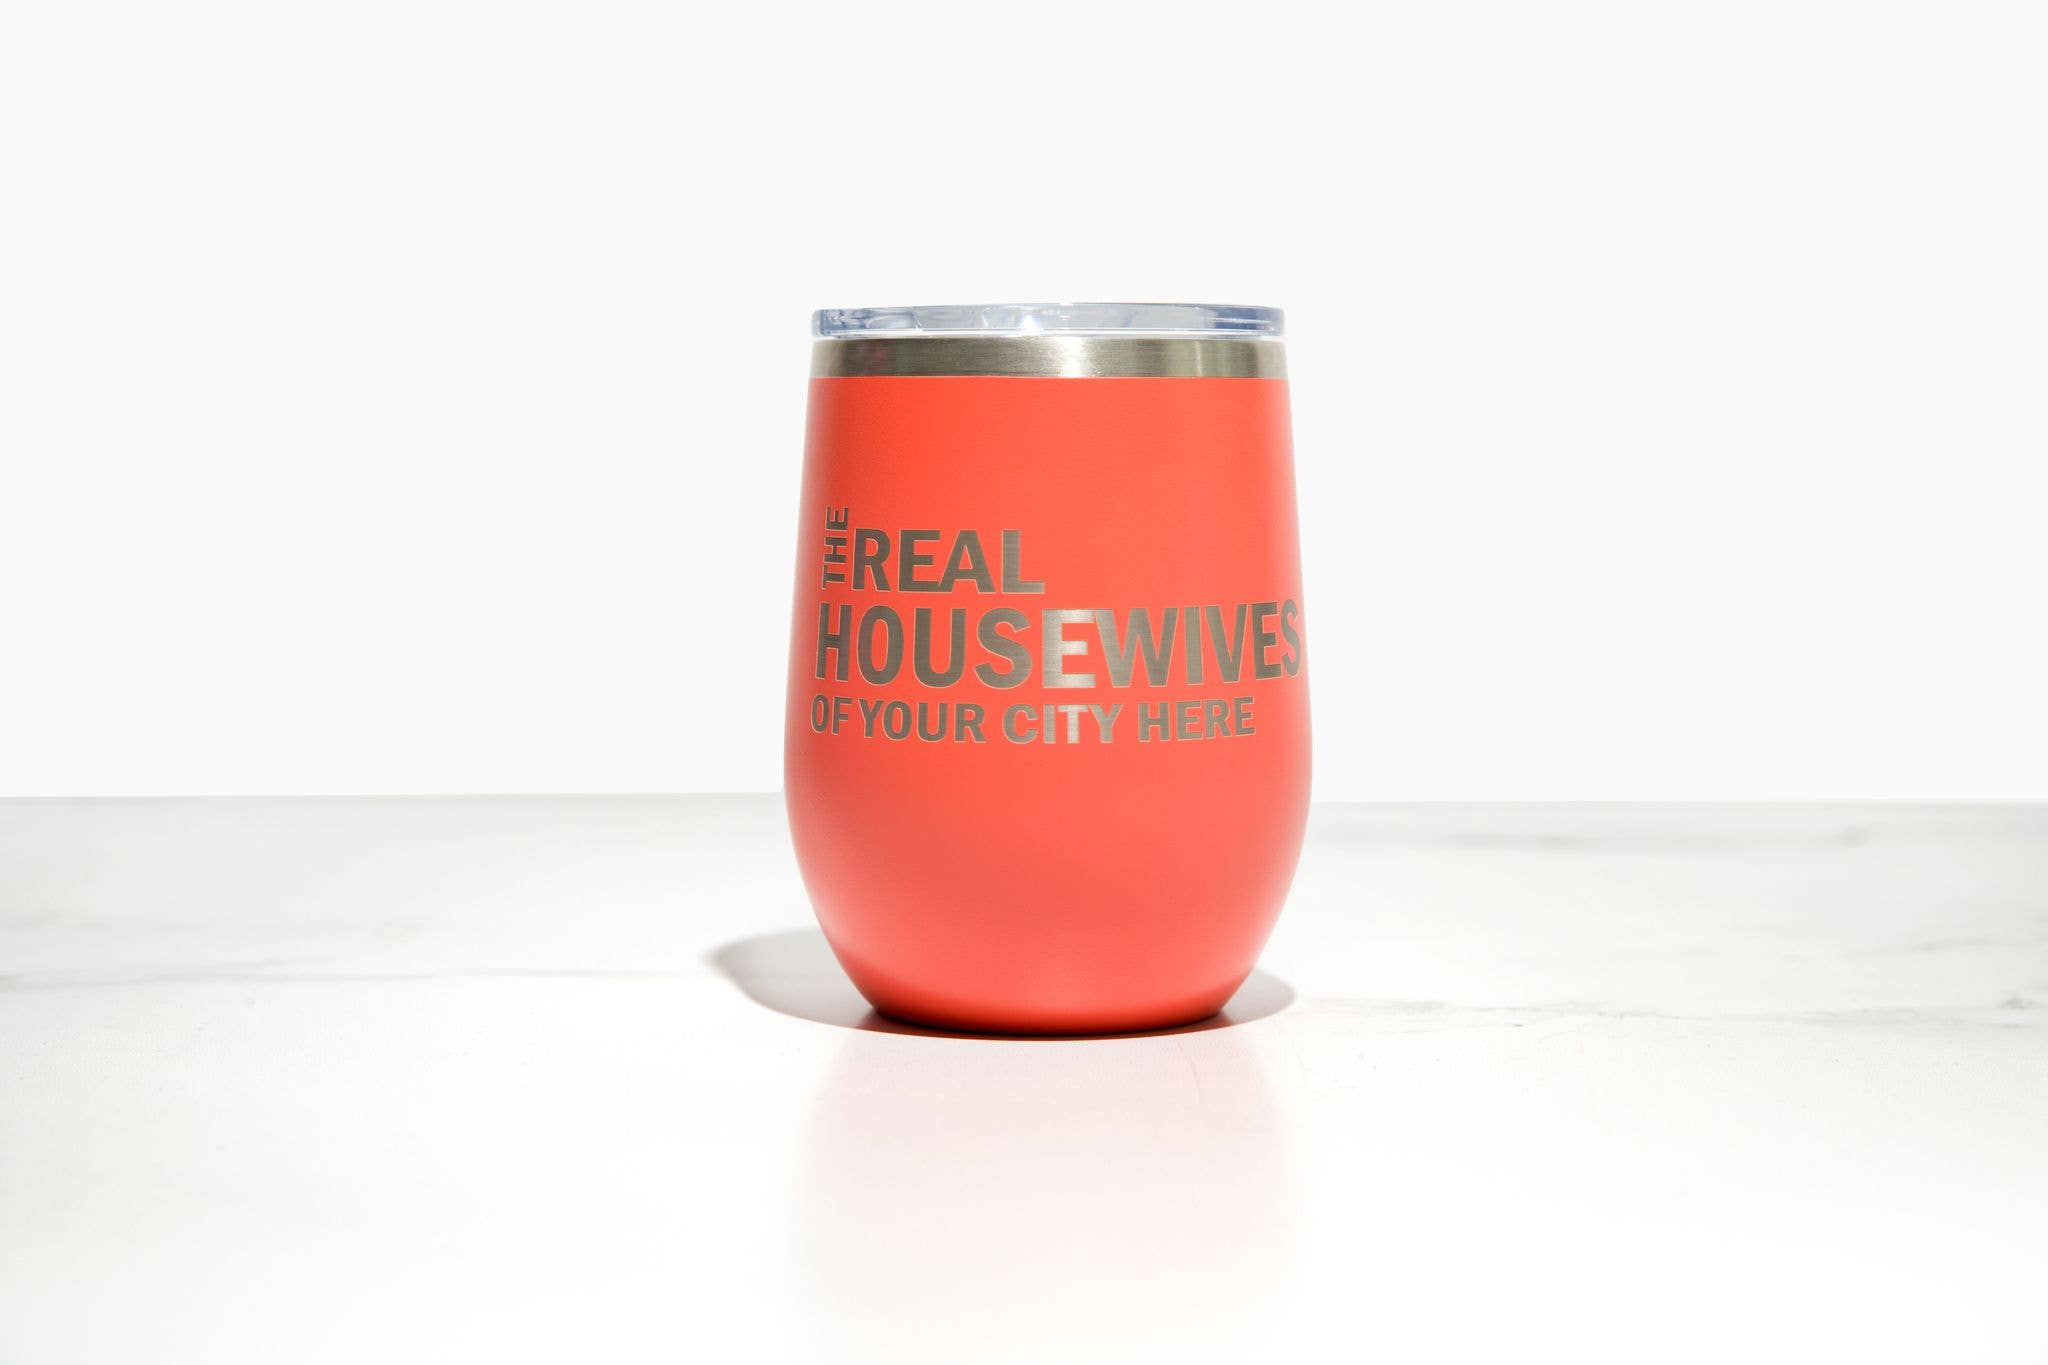 Real Housewives of YOUR CUSTOM CITY Polar Camel Wine Tumbler: White